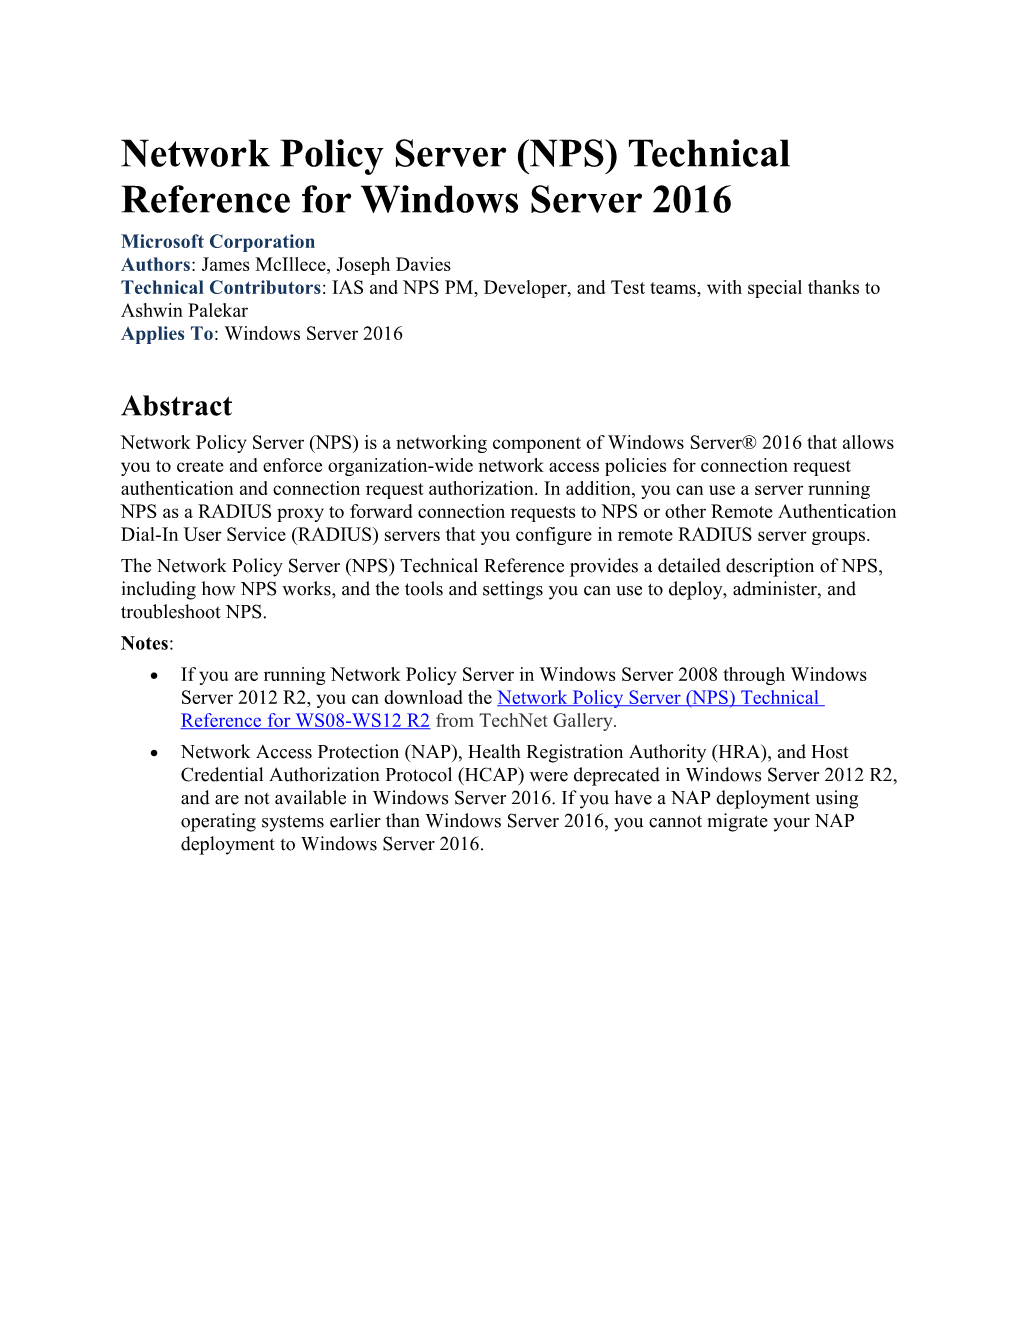 Network Policy Server (NPS) Technical Reference for Windows Server 2016